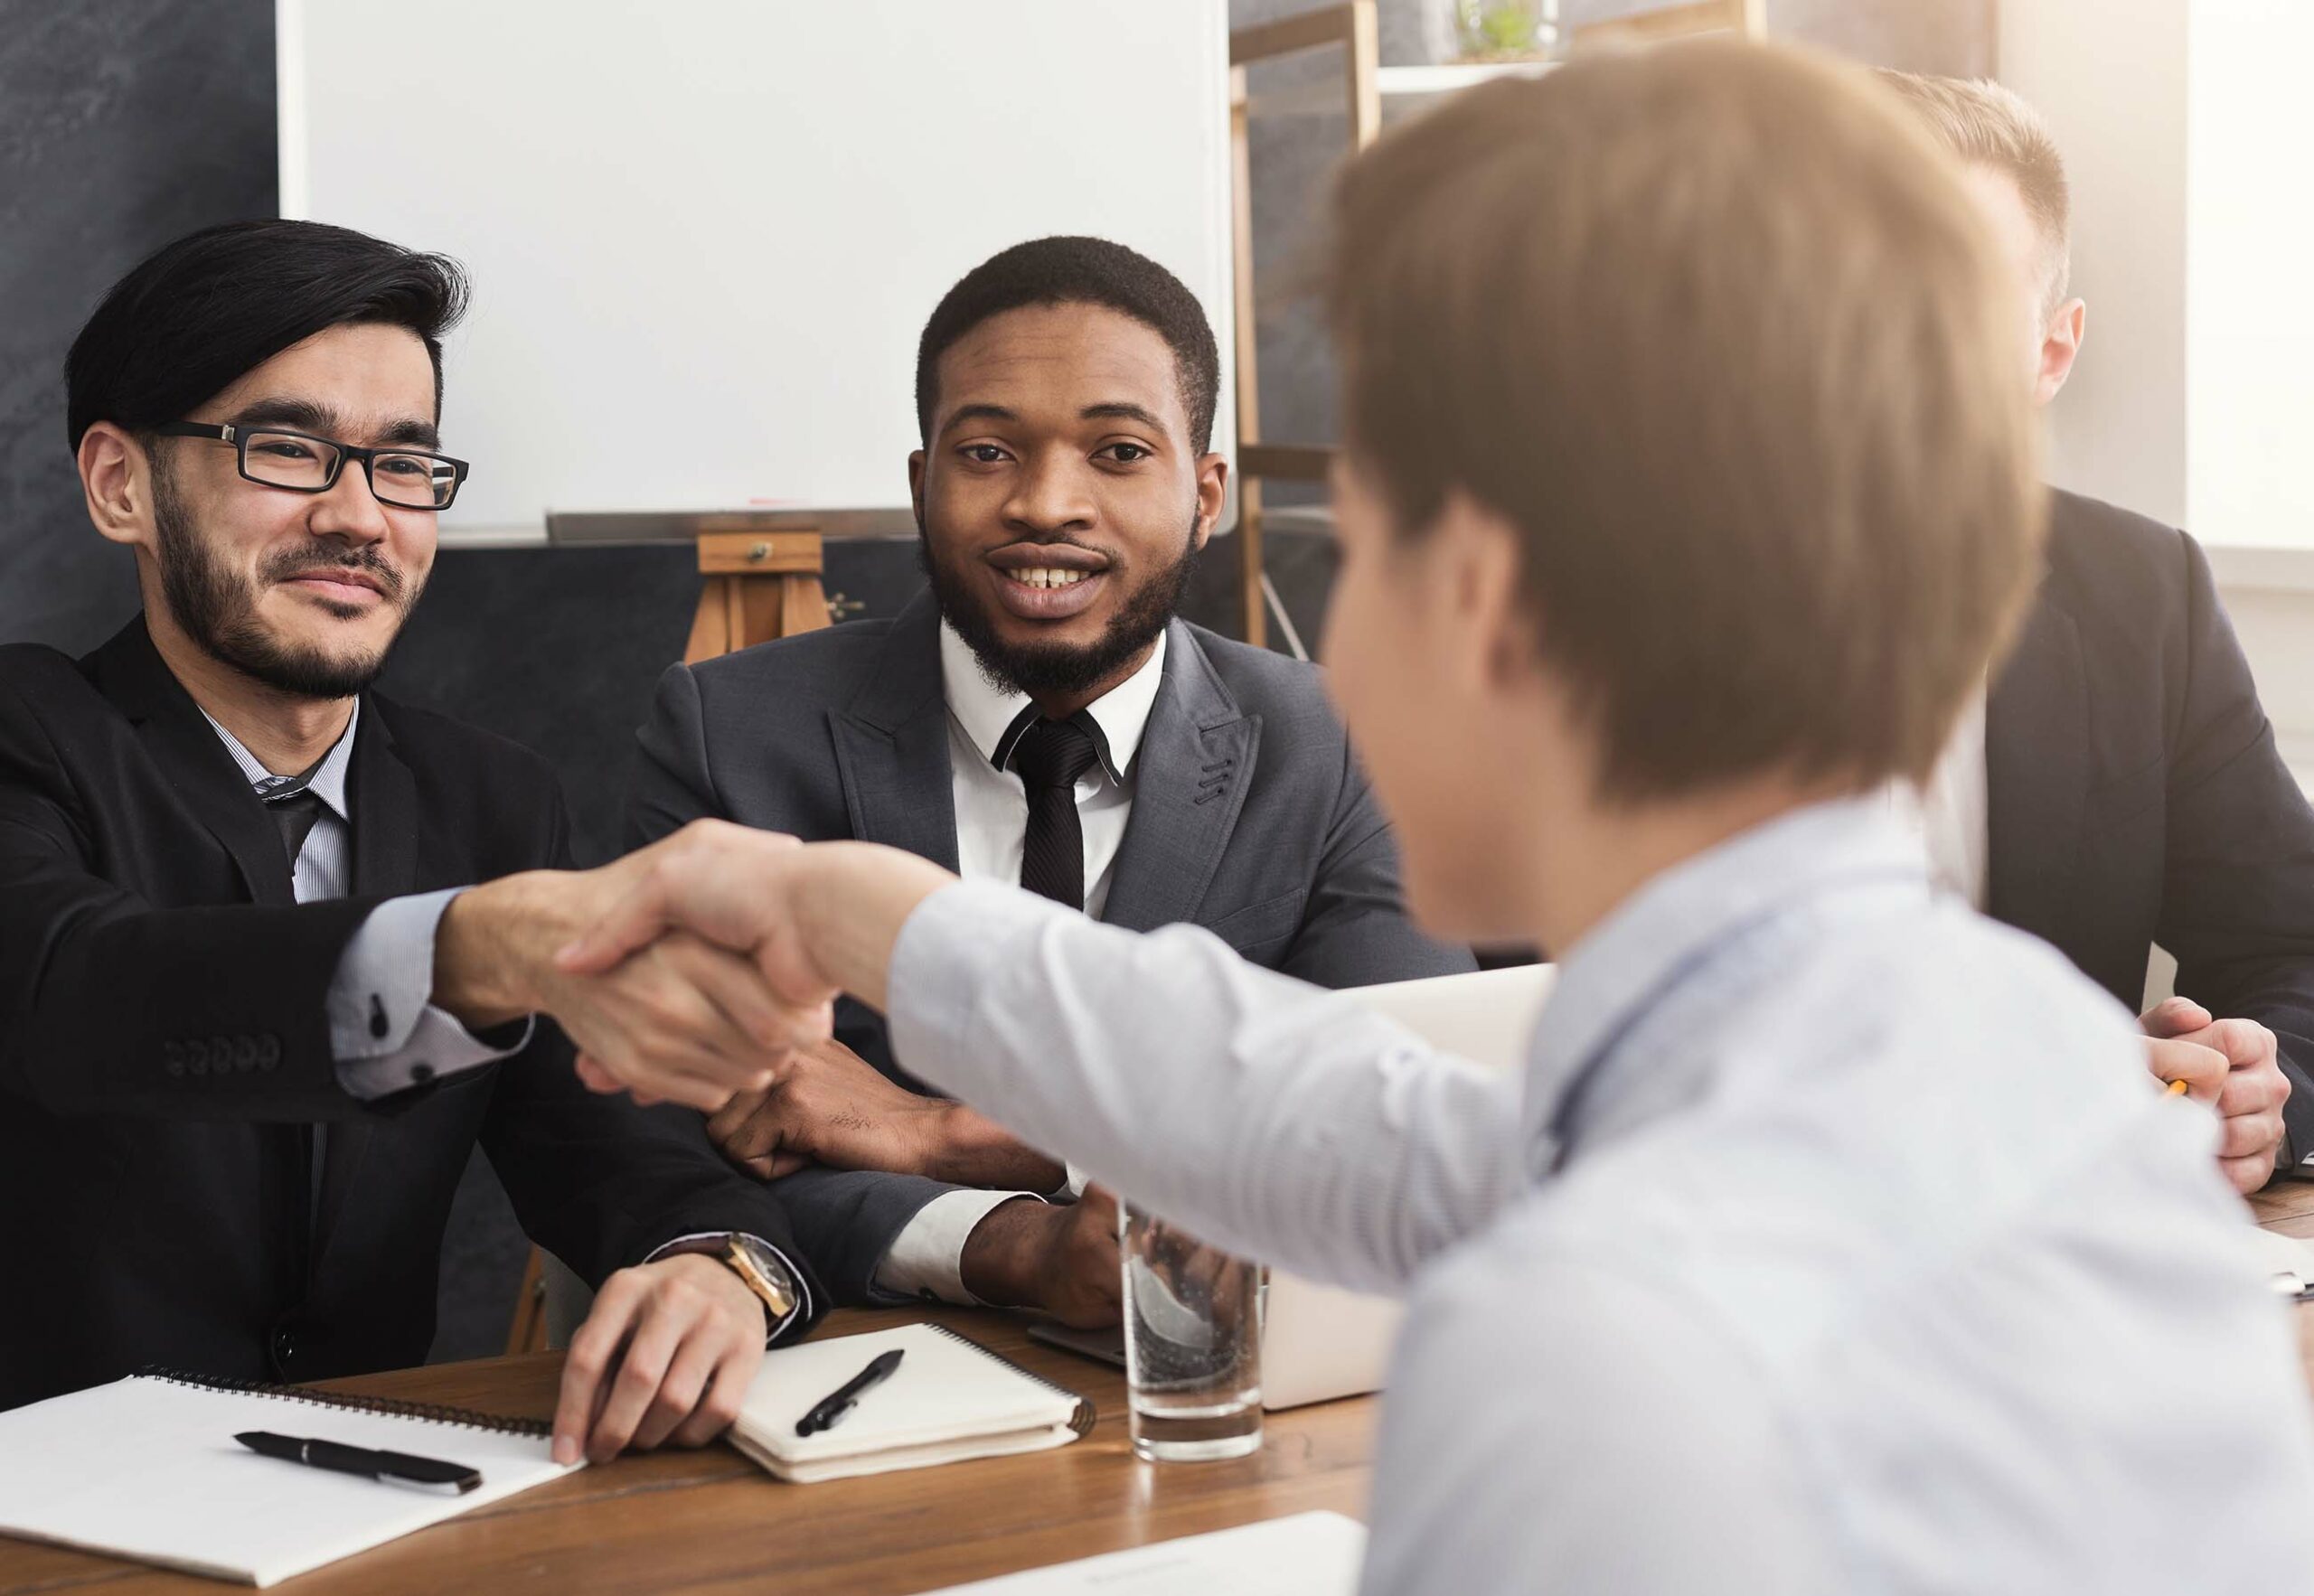 handshake-seal-deal-after-job-recruitment-meeting-smiling-businessman-shaking-hand-young-woman-he-want-hire-copy-space